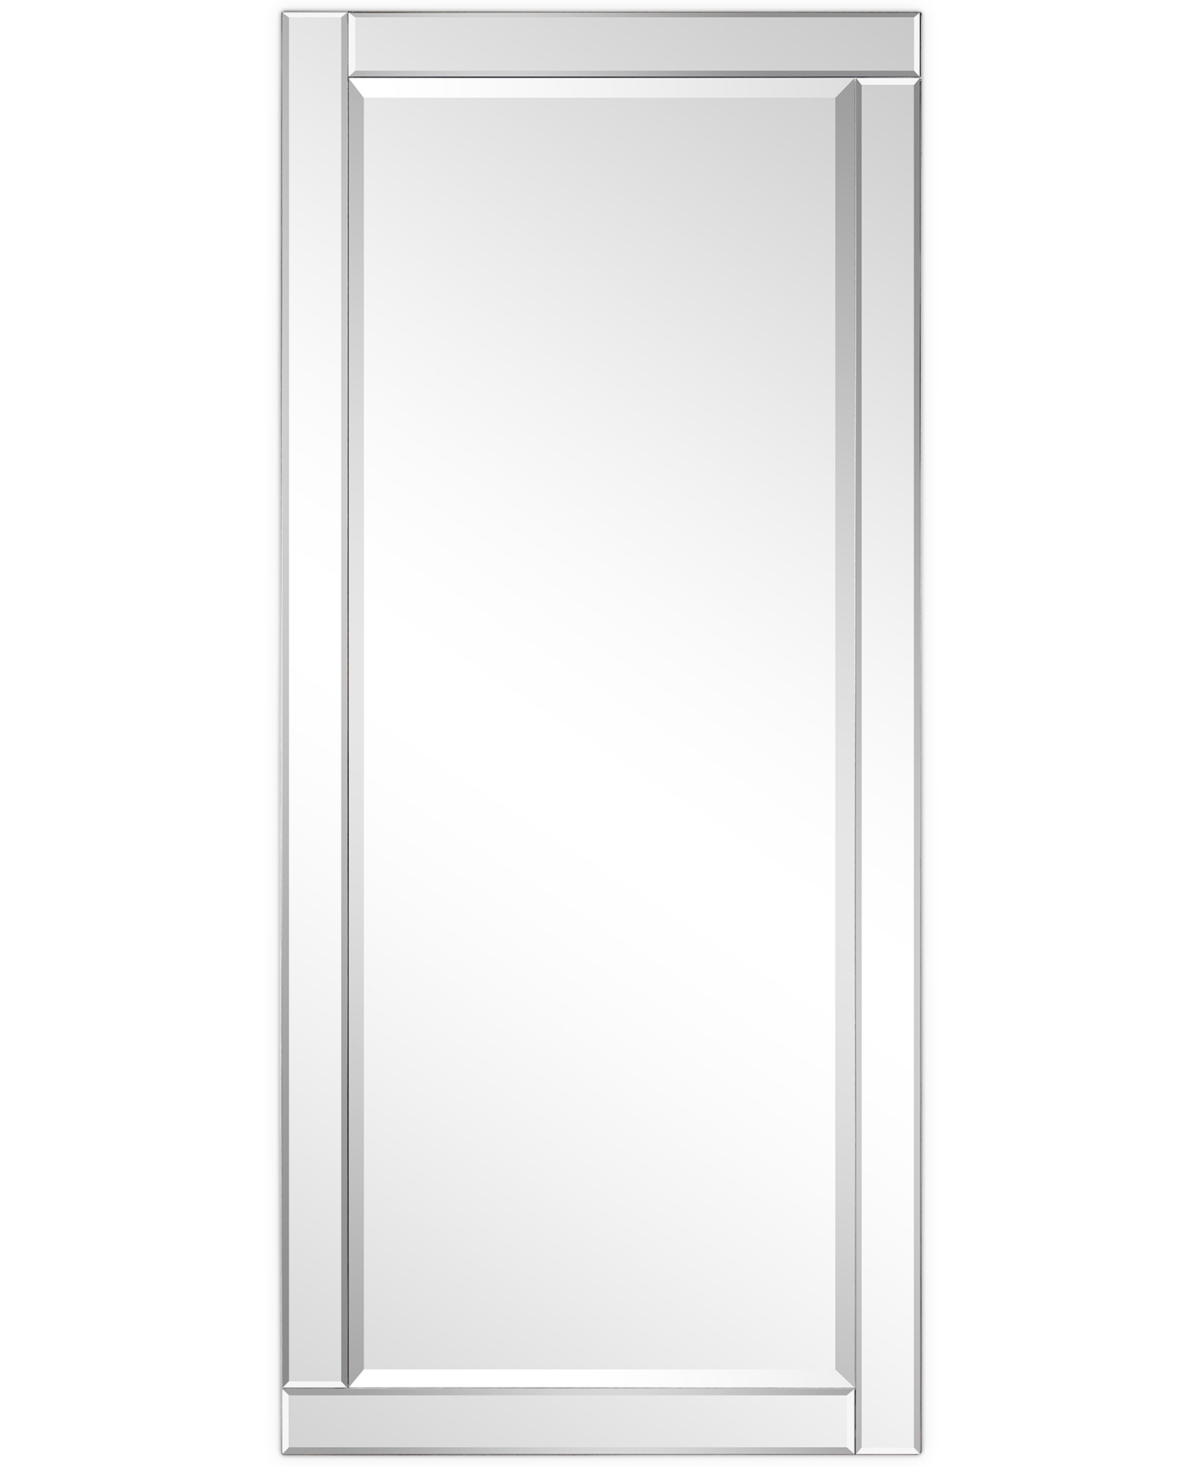 Moderno Beveled Rectangle Wall Mirror, 54" x 24" x 1.18" - Clear